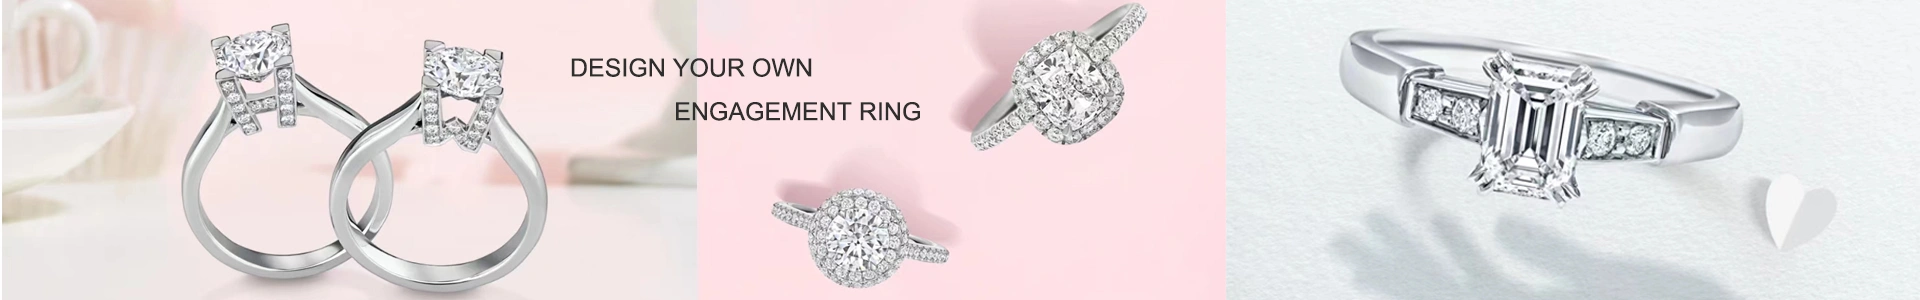 Deisgn Your Own Engagement Ring